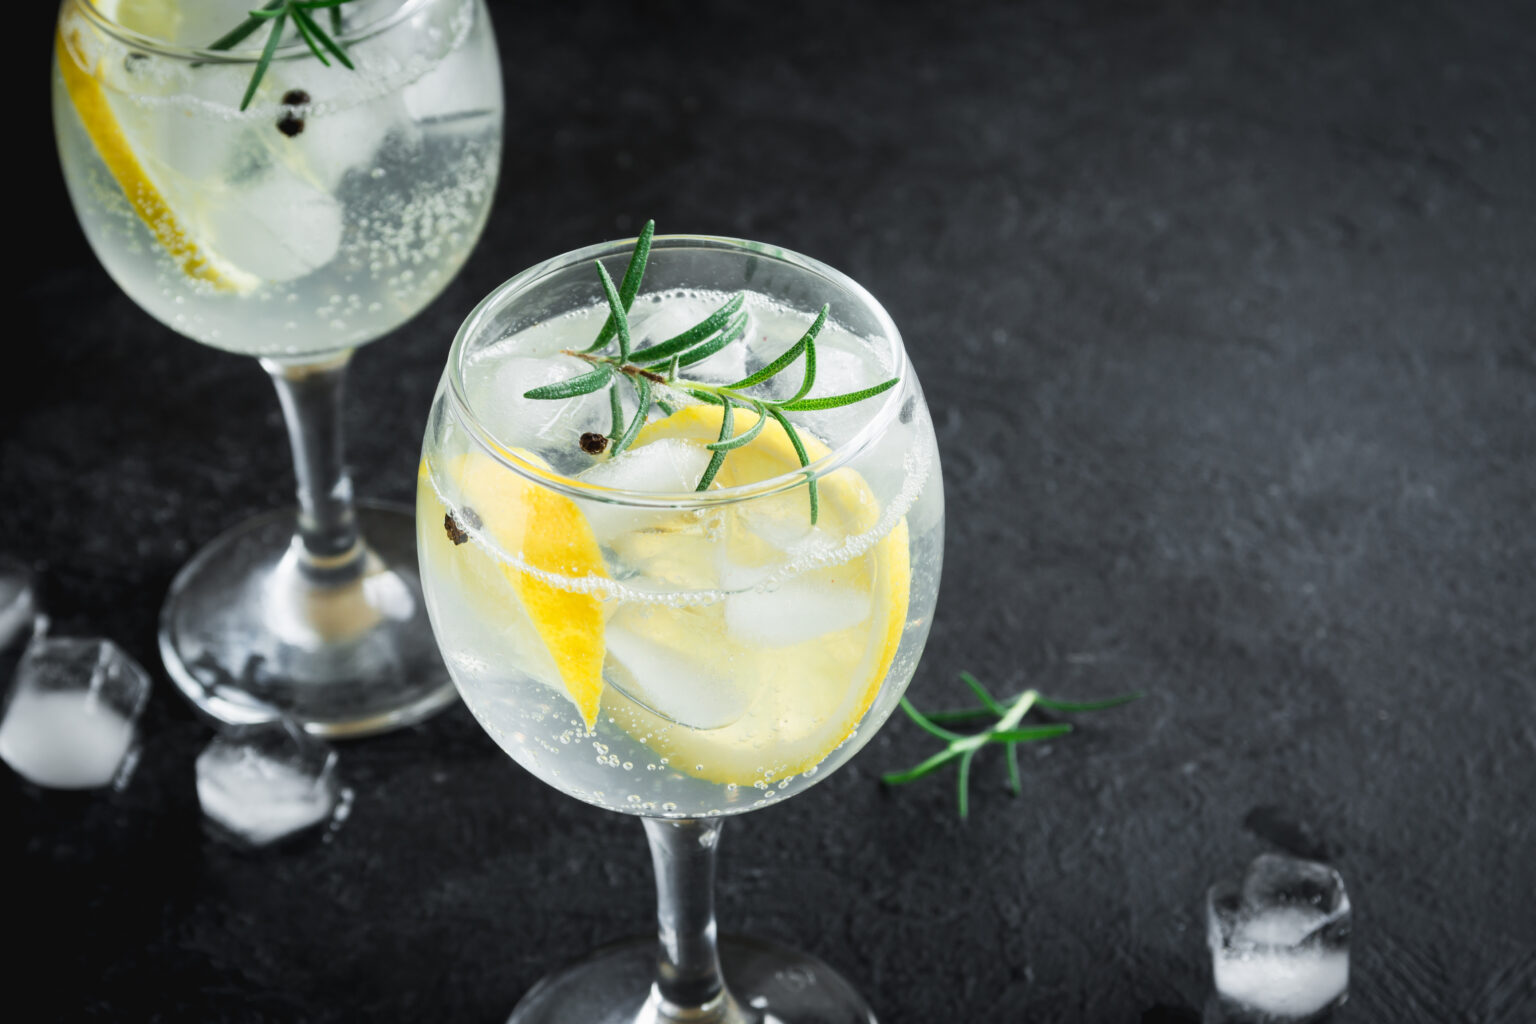 Alcohol,Drink,(gin,Tonic,Cocktail),With,Lemon,,Rosemary,And,Ice